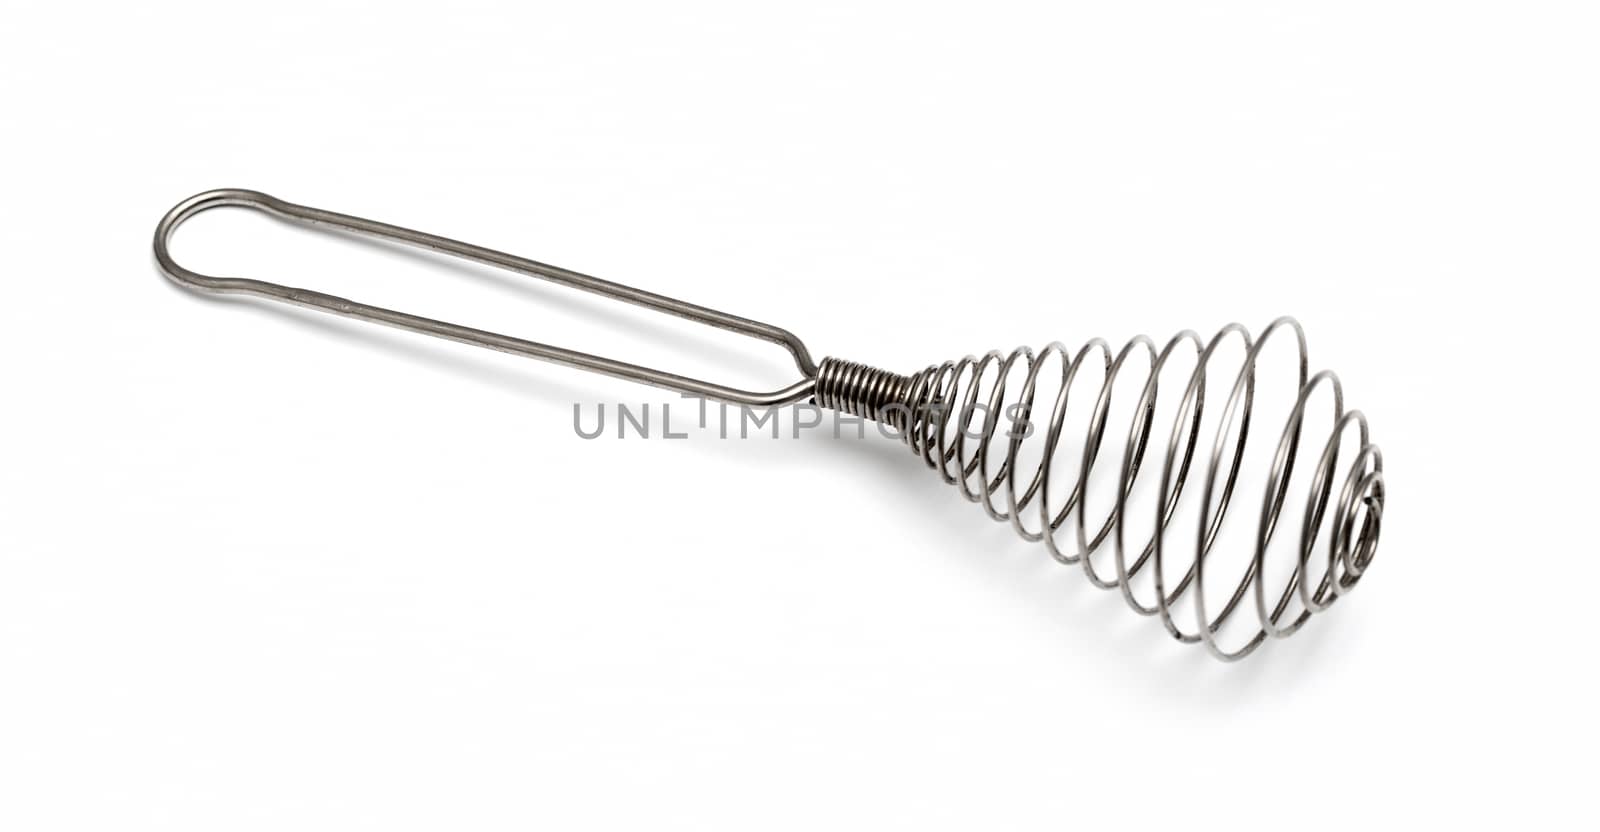 Houseware: steel whisk, isolated on white background by DNKSTUDIO